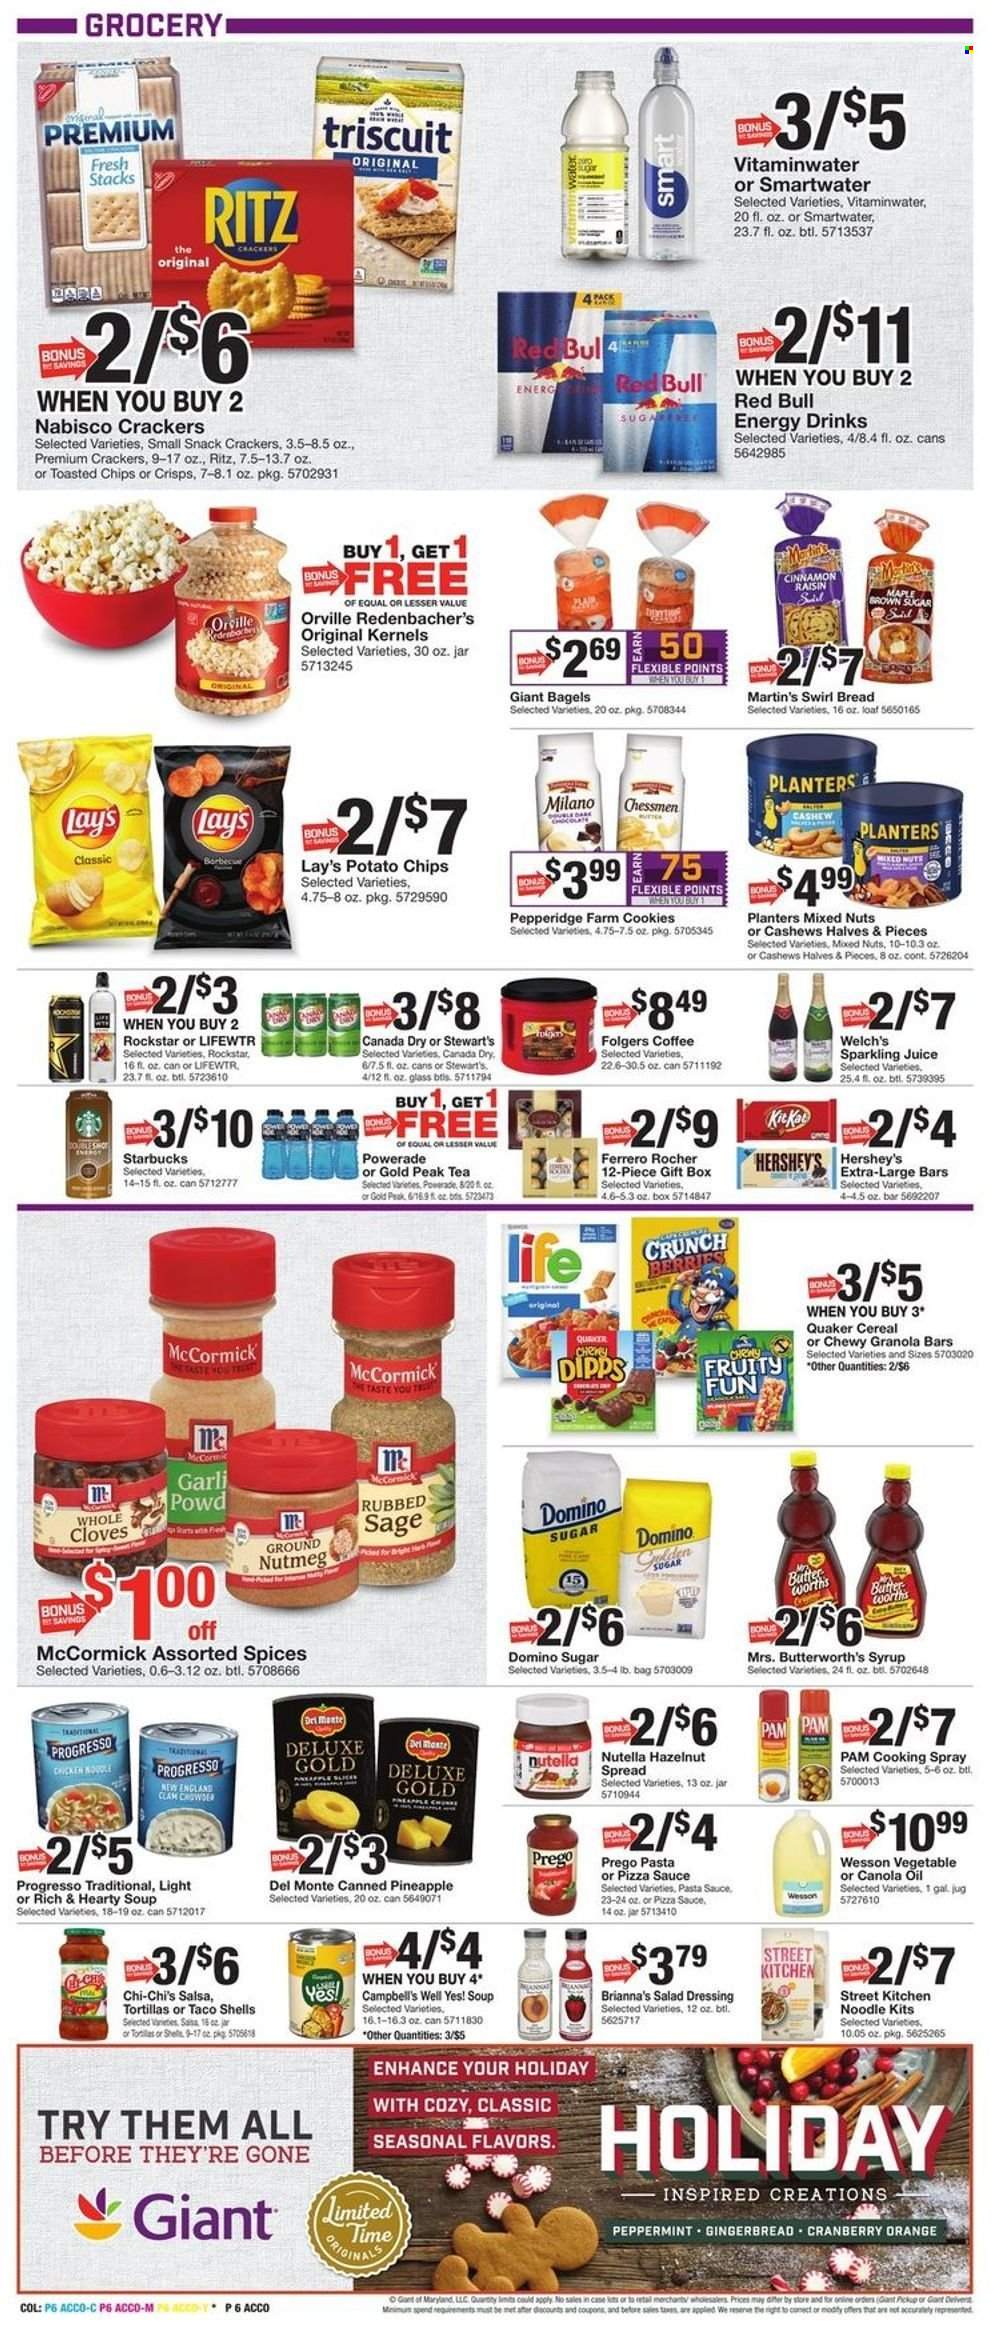 thumbnail - Giant Food Flyer - 12/02/2022 - 12/08/2022 - Sales products - bagels, bread, tortillas, gingerbread, pineapple, oranges, Welch's, Campbell's, pasta sauce, soup, Quaker, noodles, Progresso, butter, Hershey's, cookies, Nutella, snack, Ferrero Rocher, KitKat, crackers, RITZ, potato chips, chips, Lay’s, cane sugar, clam chowder, Del Monte, cereals, granola bar, nutmeg, cloves, salad dressing, dressing, salsa, canola oil, cooking spray, oil, syrup, hazelnut spread, cashews, mixed nuts, Planters, Canada Dry, Powerade, juice, energy drink, Red Bull, sparkling juice, Gold Peak Tea, Rockstar, Lifewtr, Smartwater, tea, coffee, Starbucks, Folgers, gift box. Page 6.